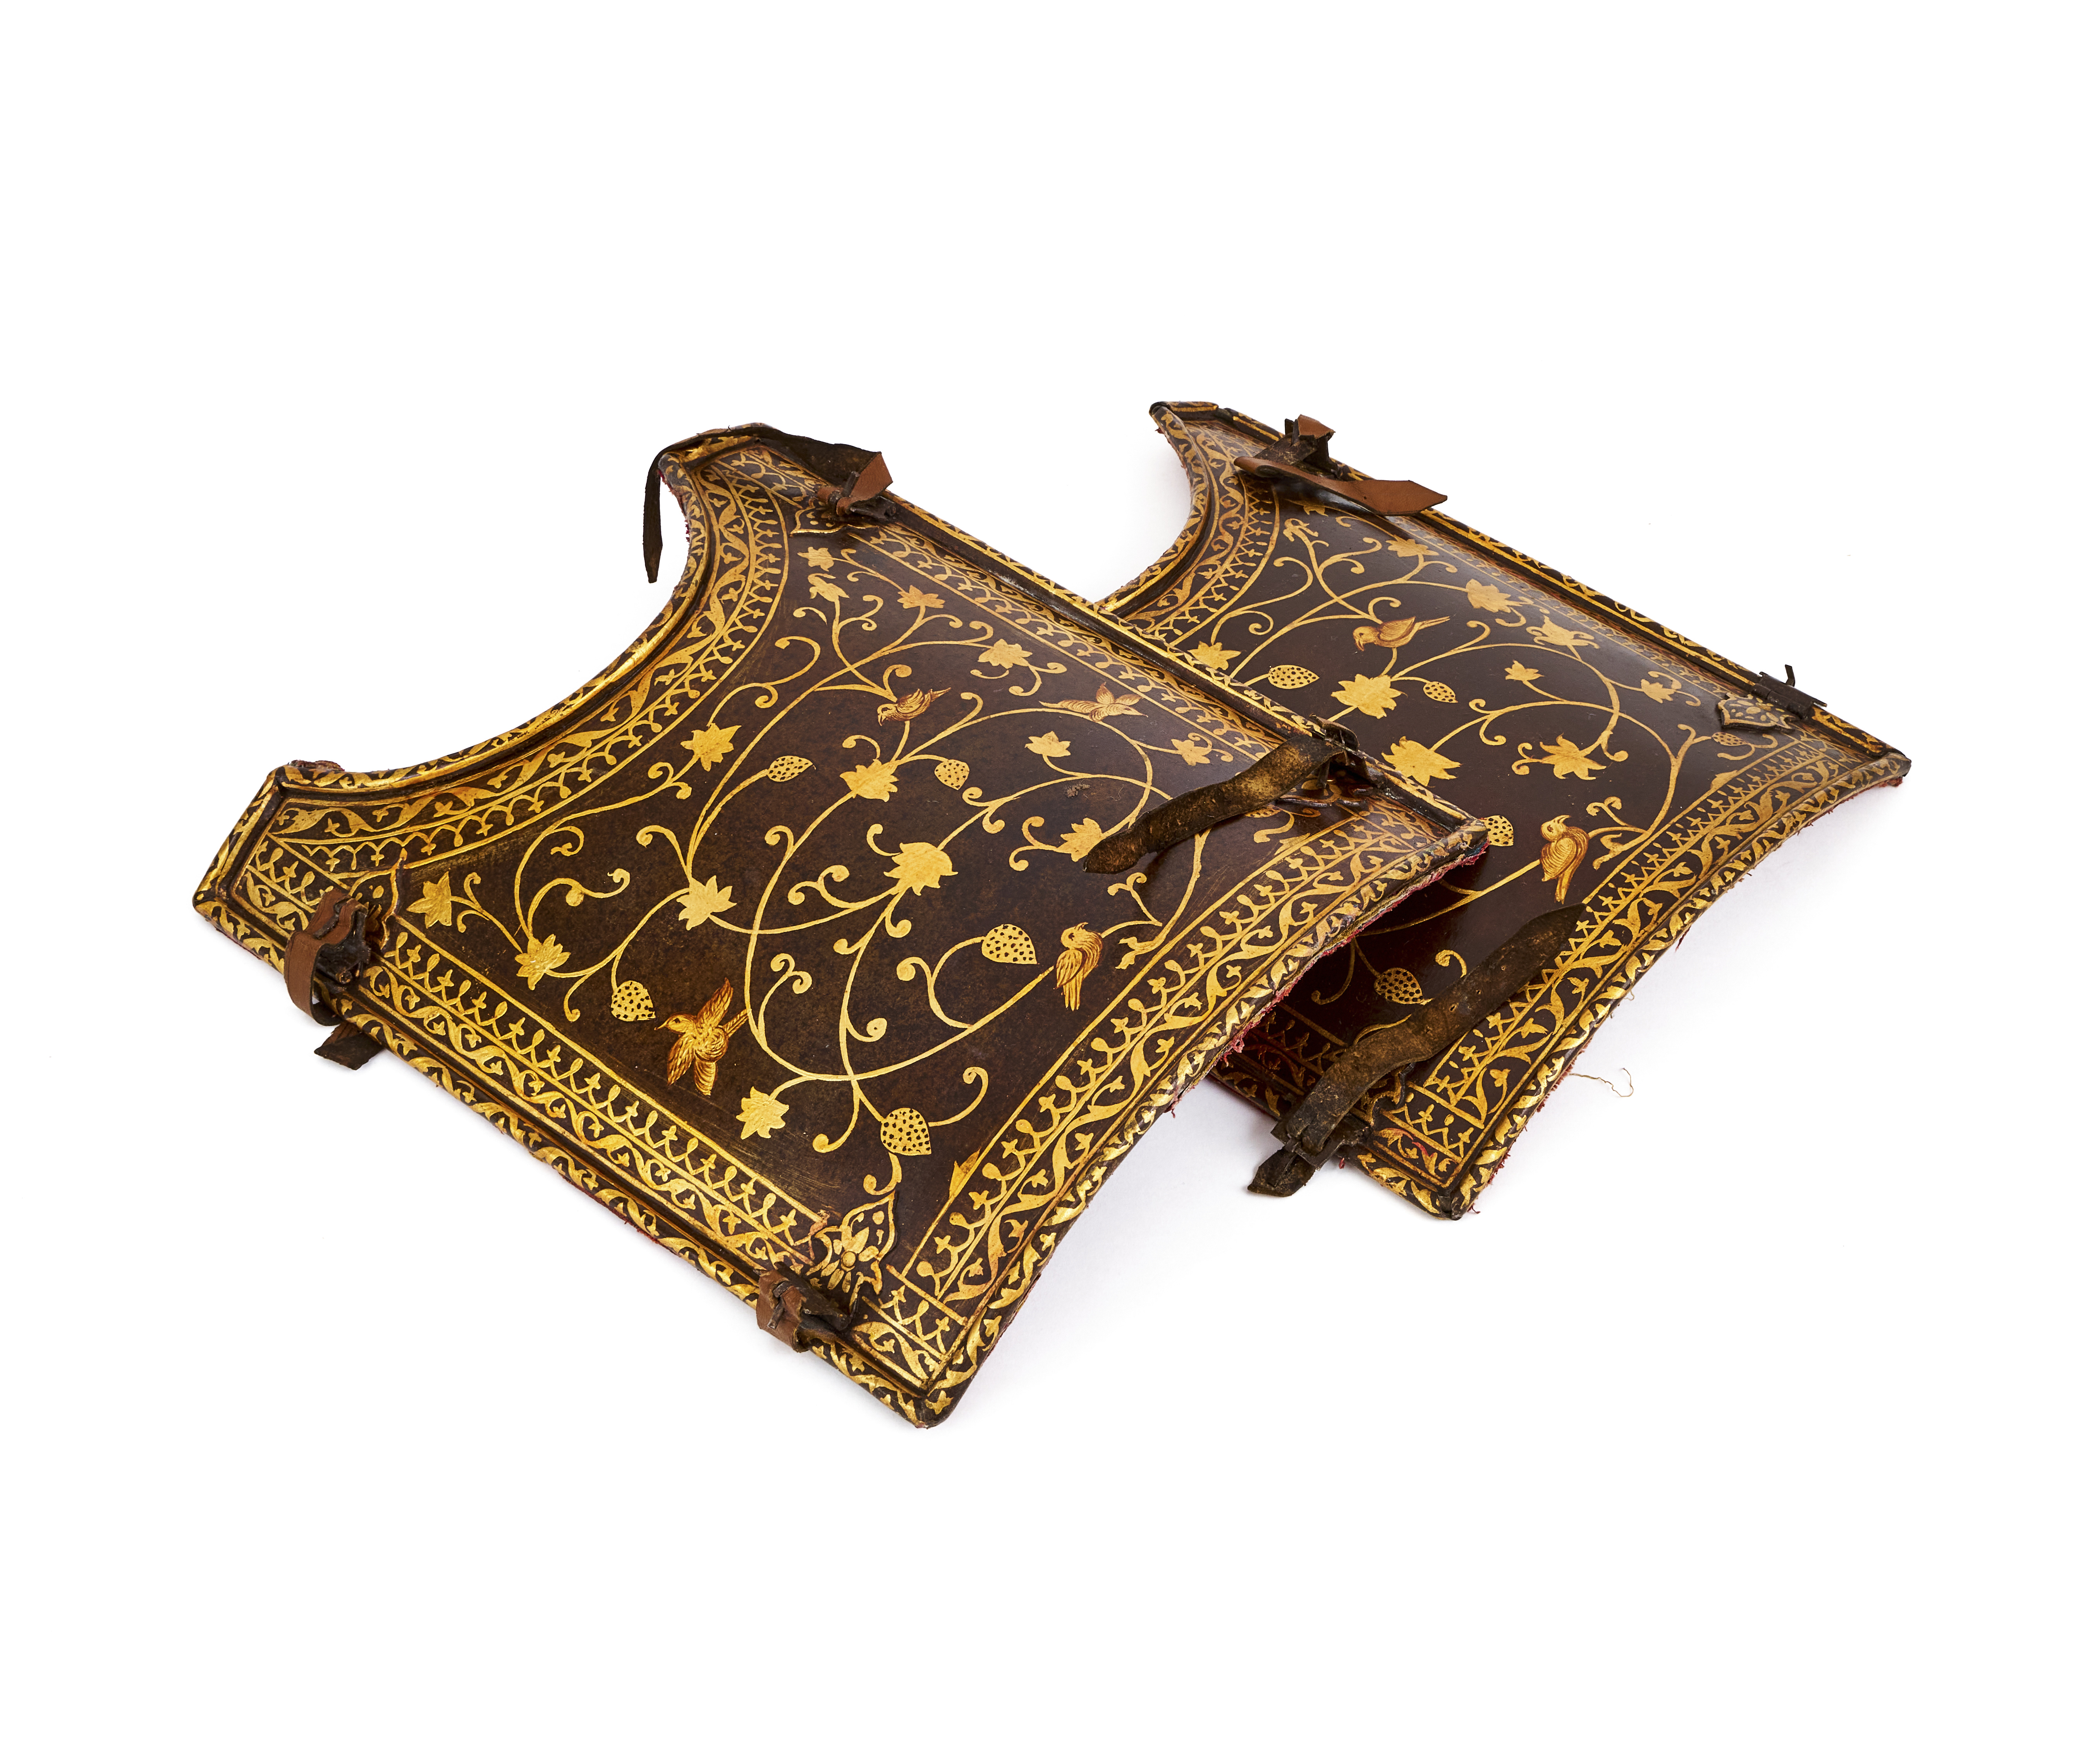 A PAIR OF GOLD-DAMASCENED STEEL SIDE ARMOUR PLATES, 19TH CENTURY, QAJAR